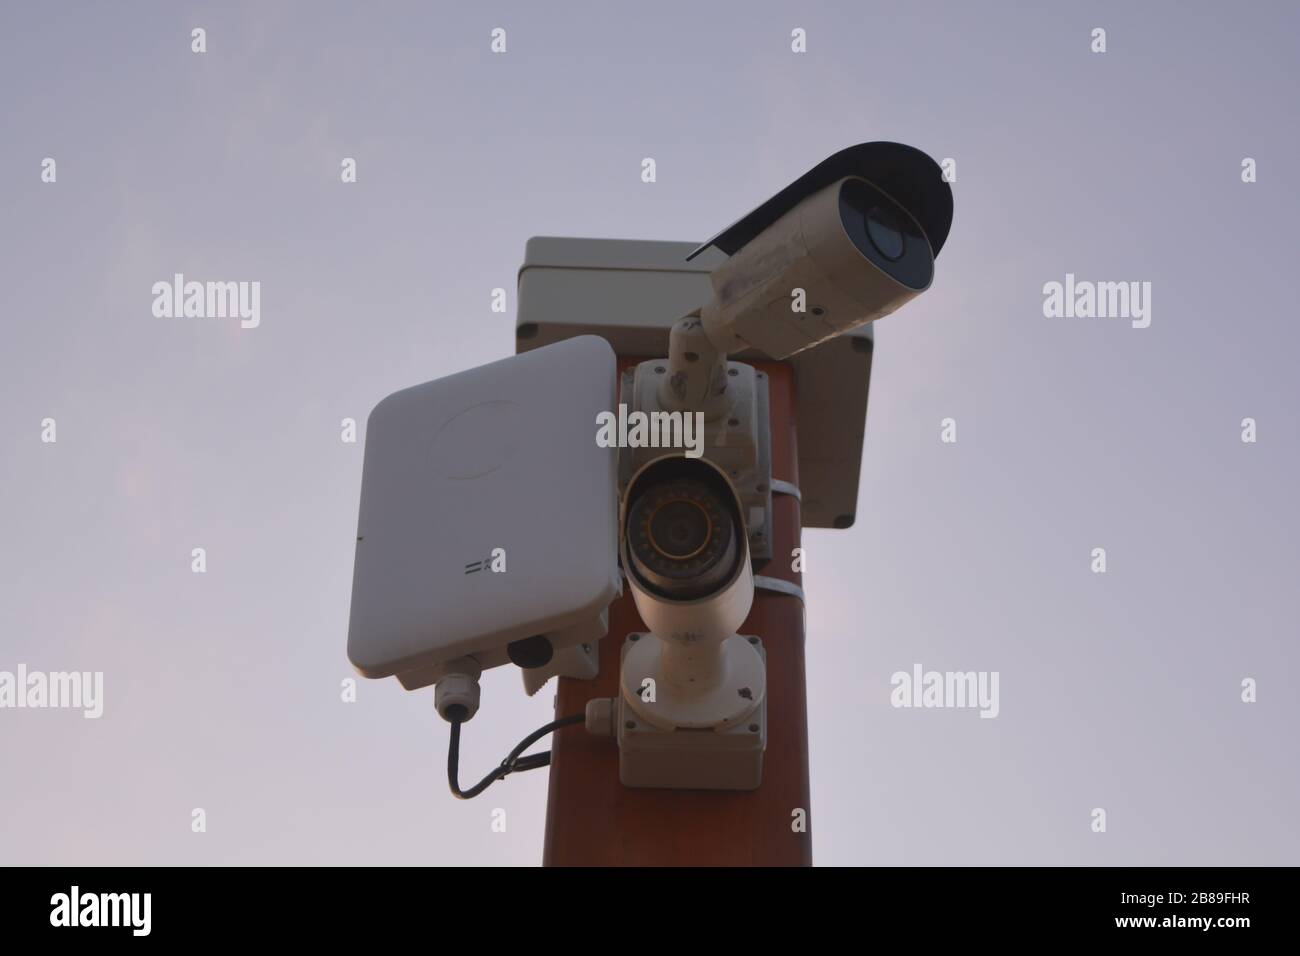 Two white security cameras (CCTV) record video for public safety and security. Advanced technological system that violates privacy and freedom spying Stock Photo